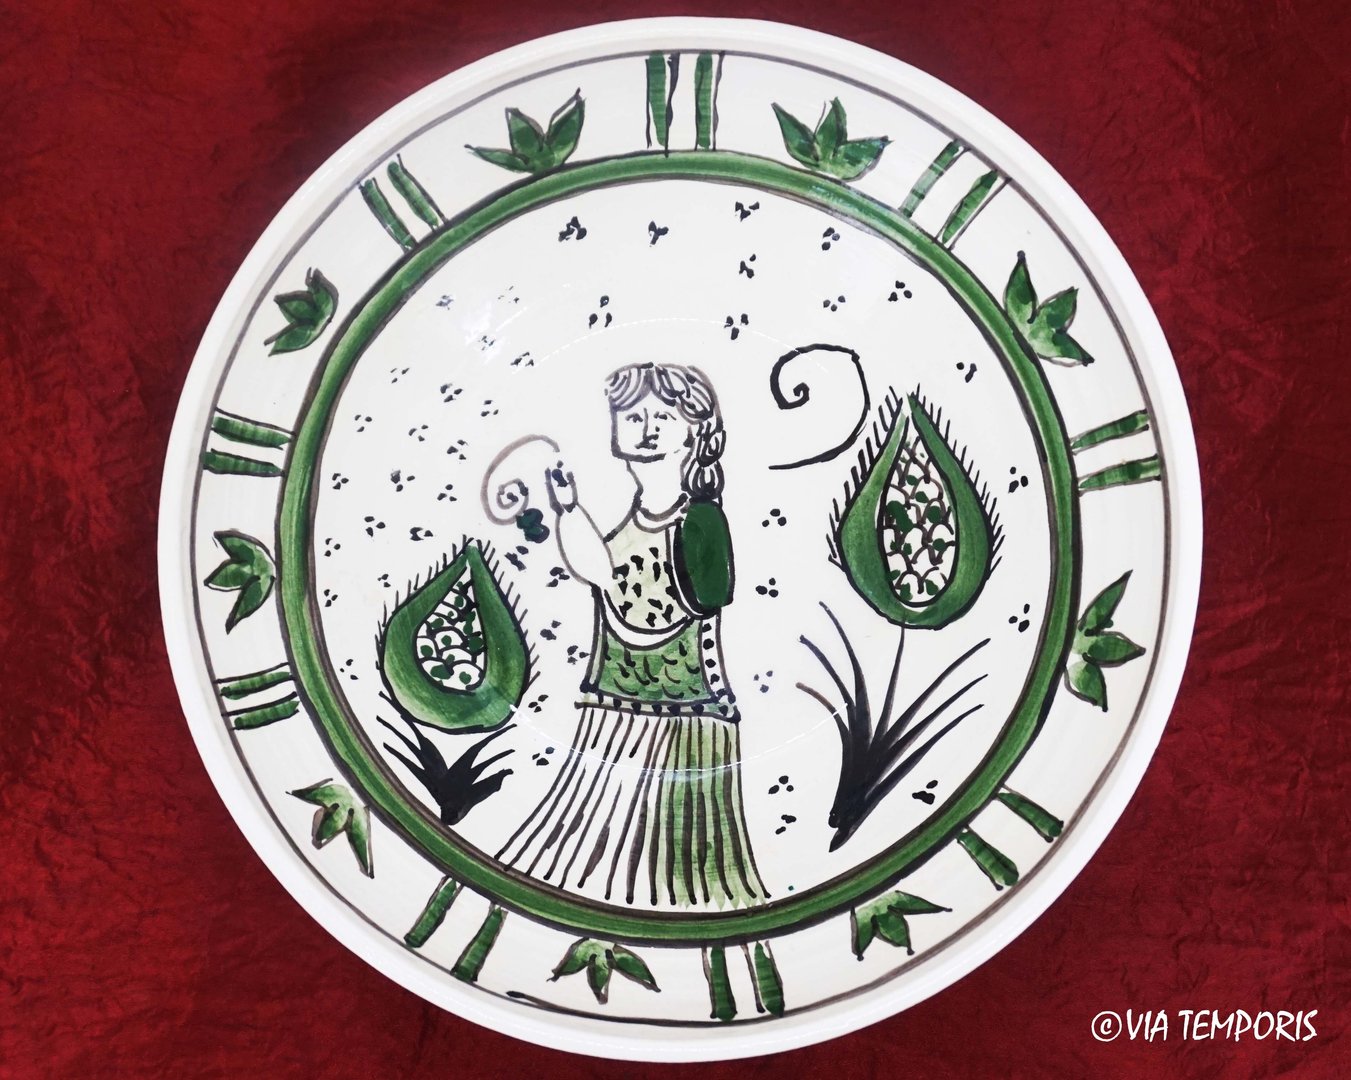 MEDIEVAL POTTERY - MAJOLICA PLATE WITH WOMAN DECOR